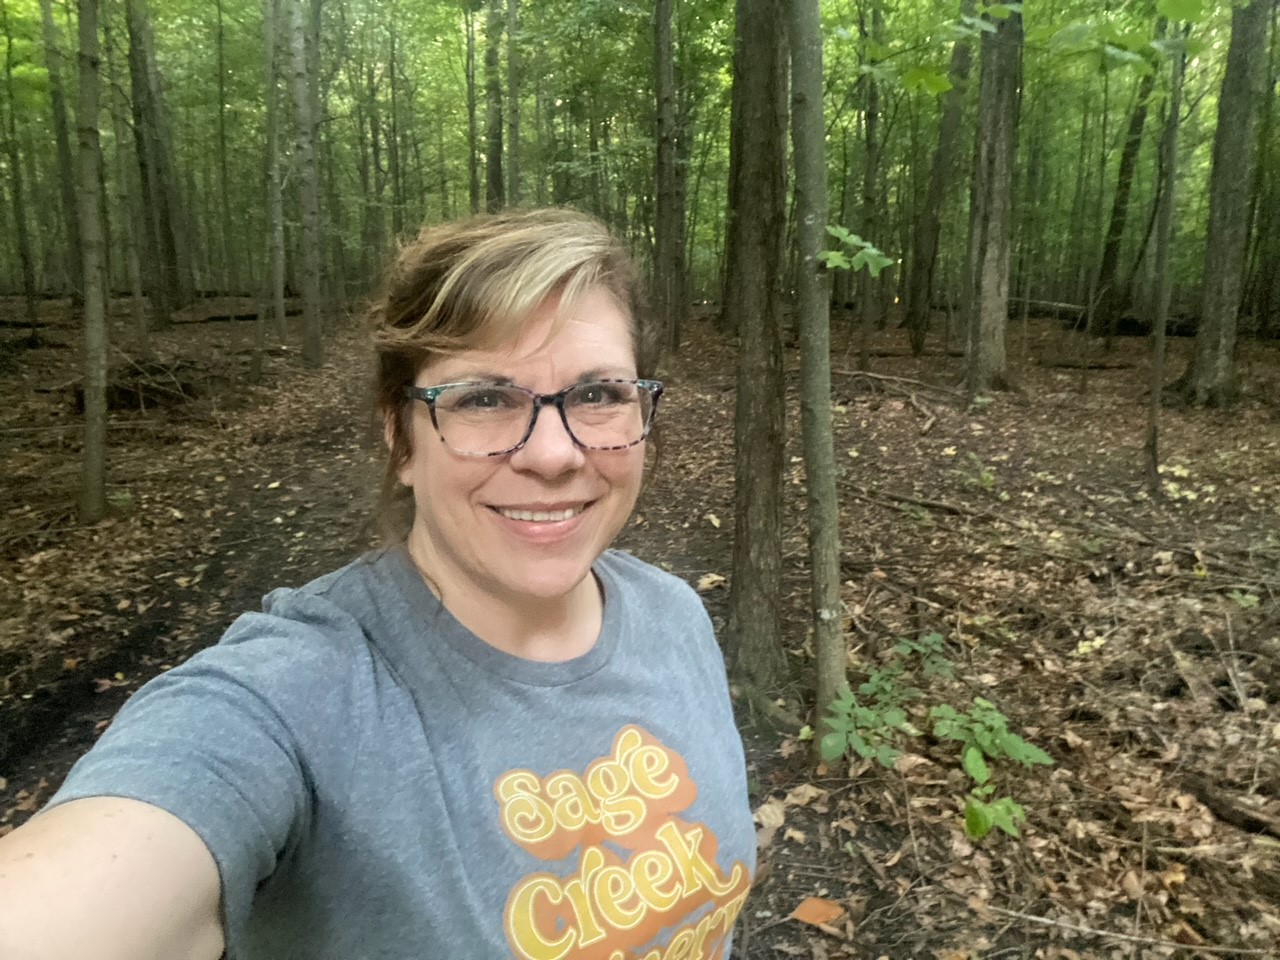 Office Manager Diane out hiking trails near her home